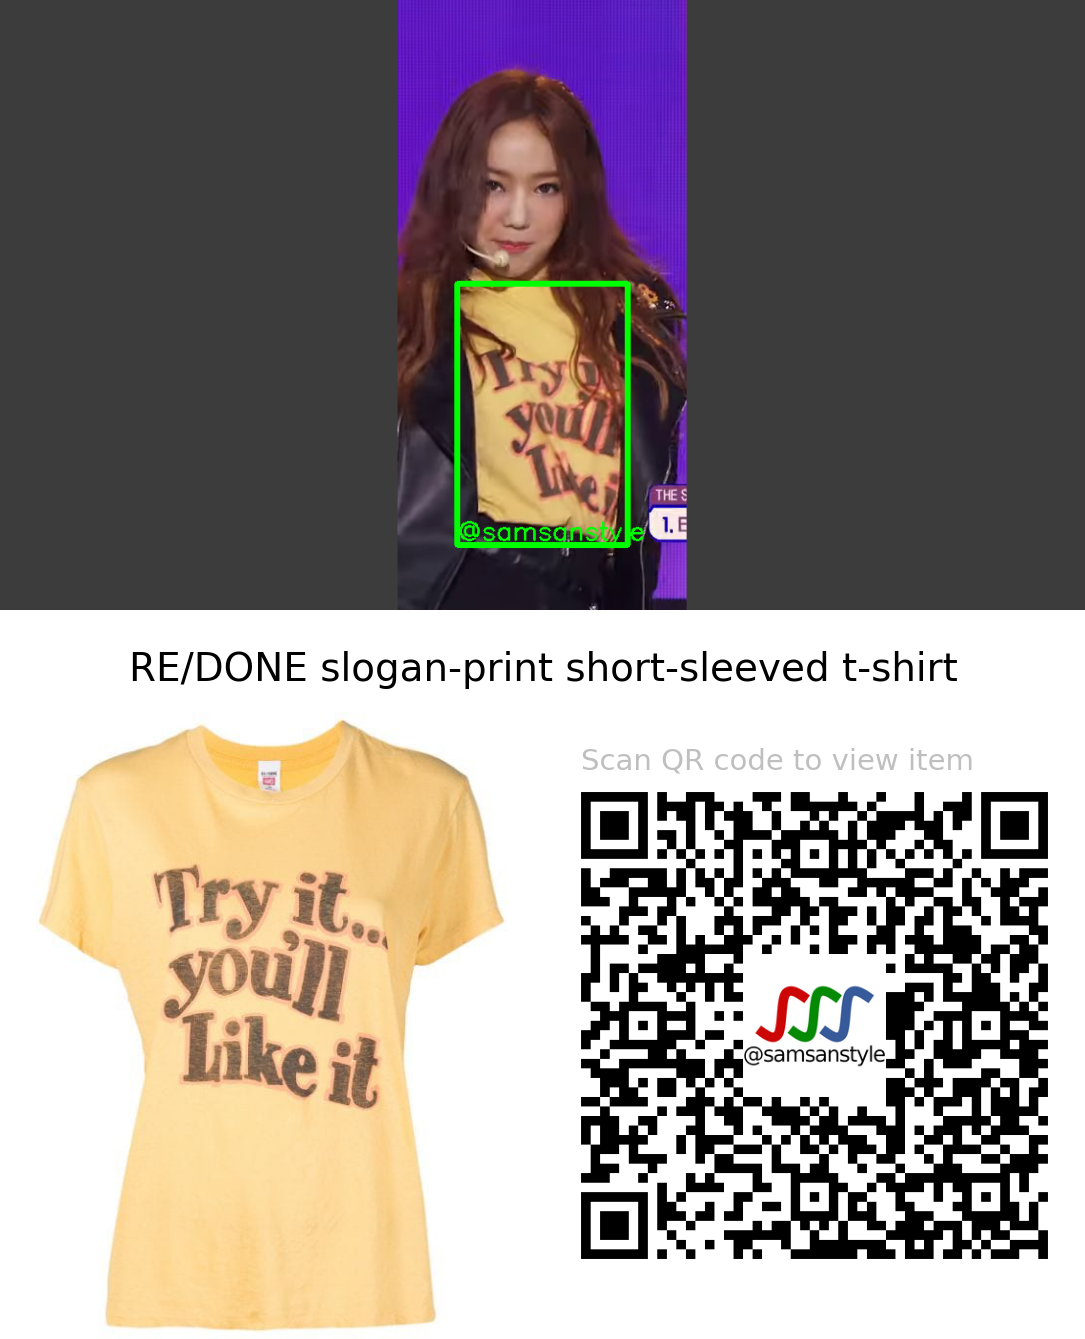 bugAboo Zin | bugAboo SBS MTV The Show | RE/DONE “Try it… you’ll like it” t-shirt